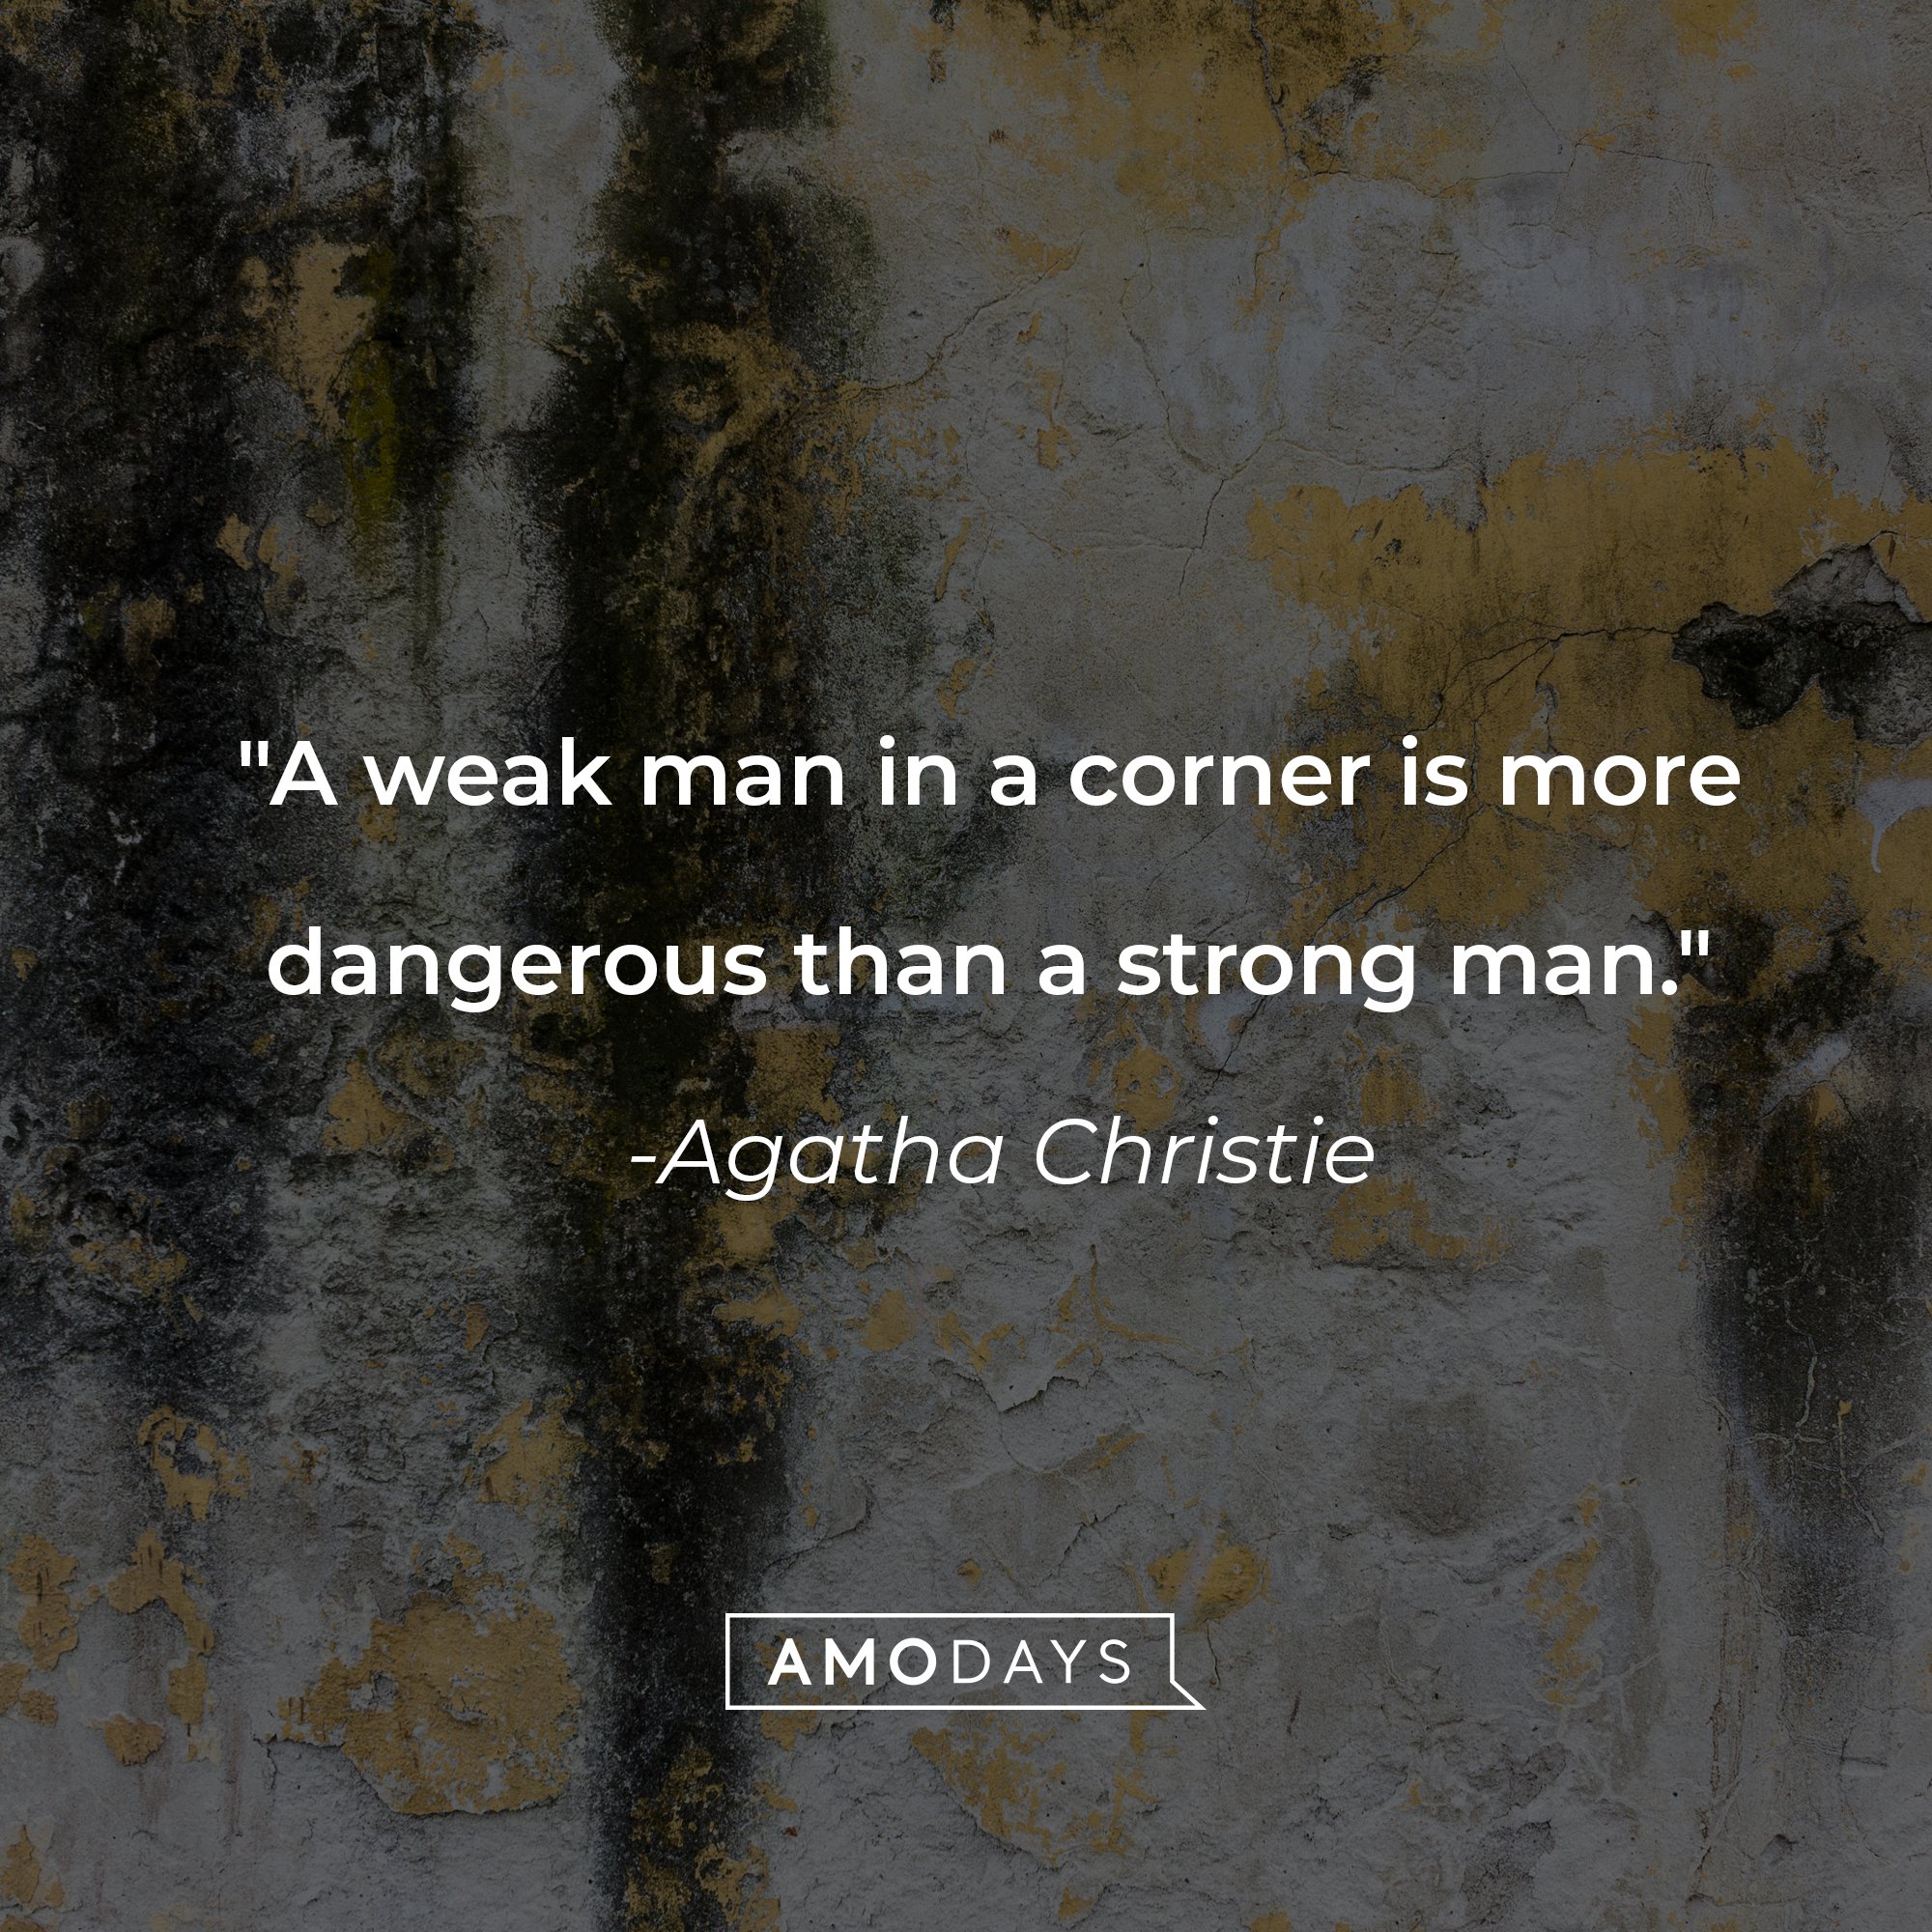 Agatha Christie's quote: "A weak man in a corner is more dangerous than a strong man." | Image: AmoDays